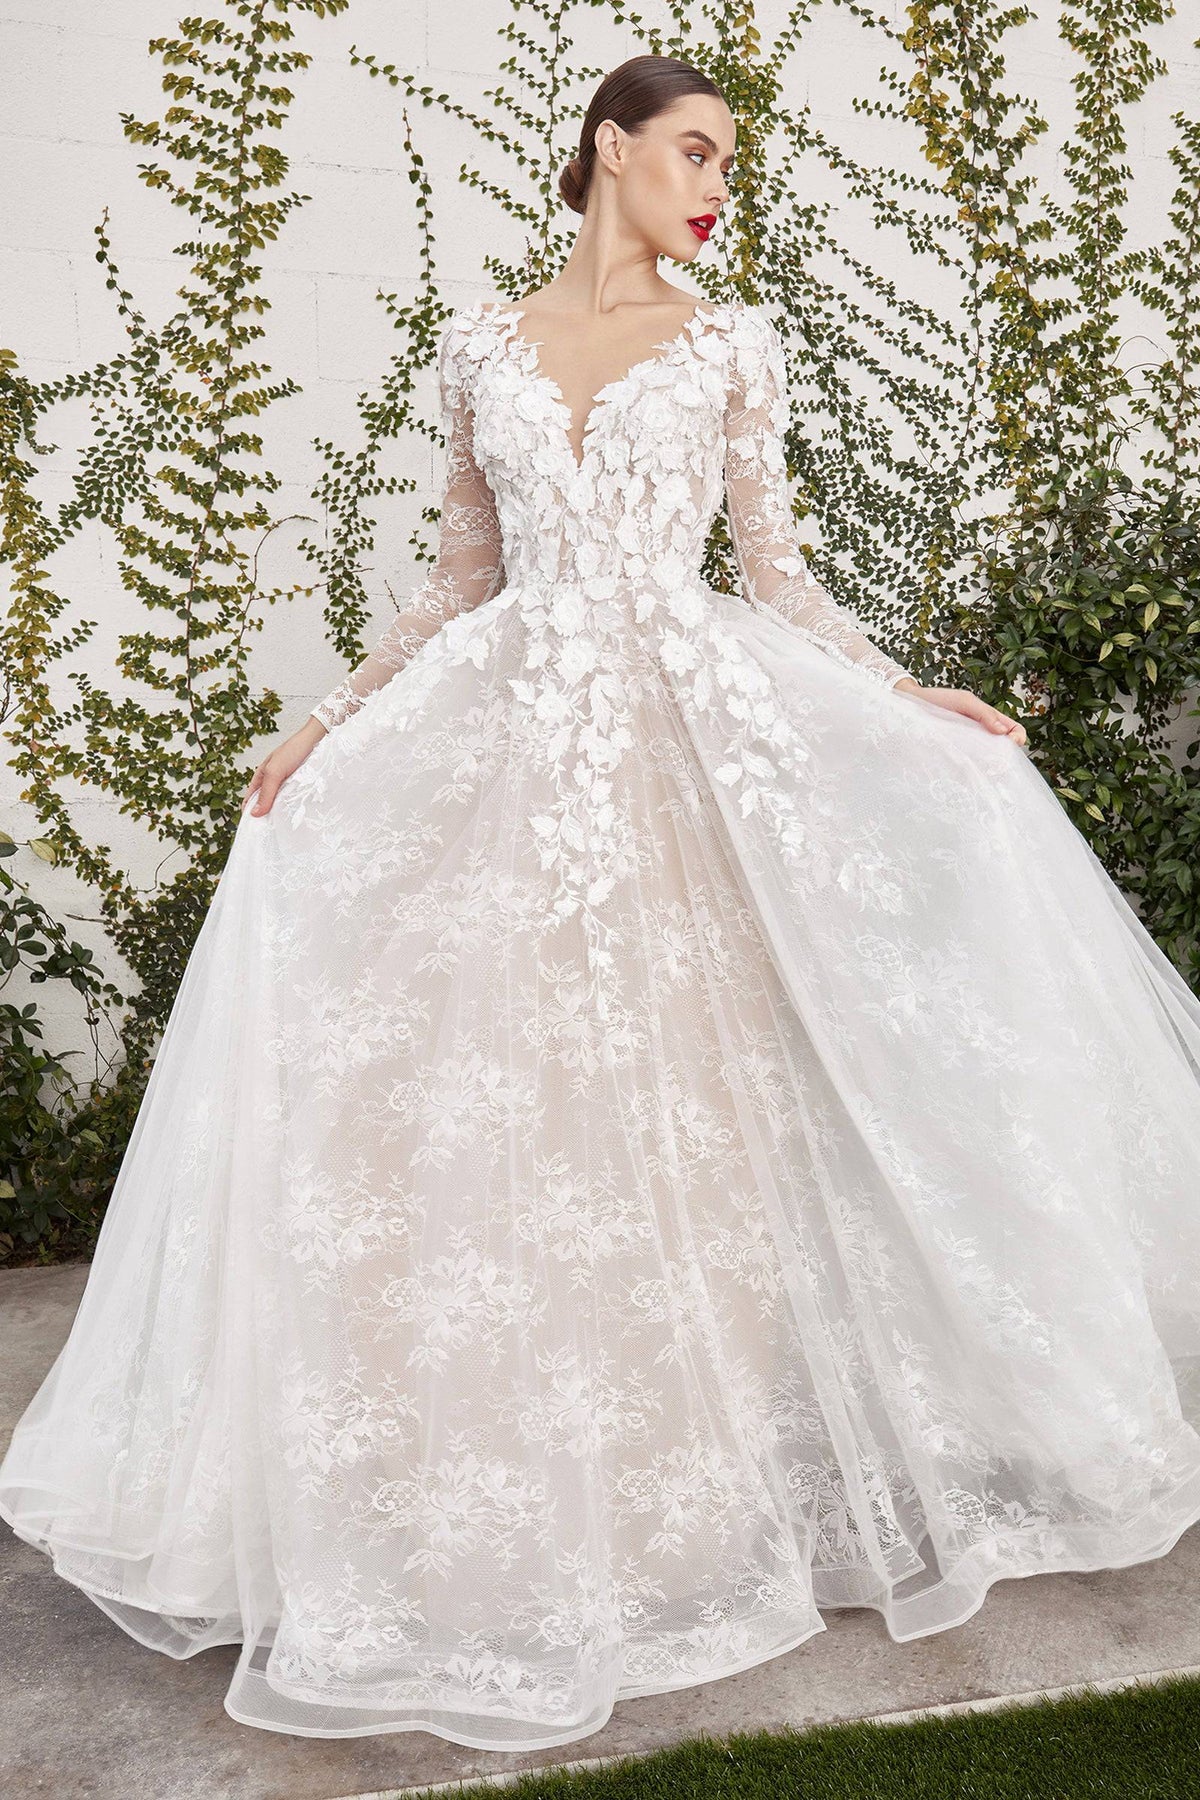 Luxe A1067 Long Sleeve Lace & Floral Wedding Dress with Flowing Train - Norma Reed - NORMA REED